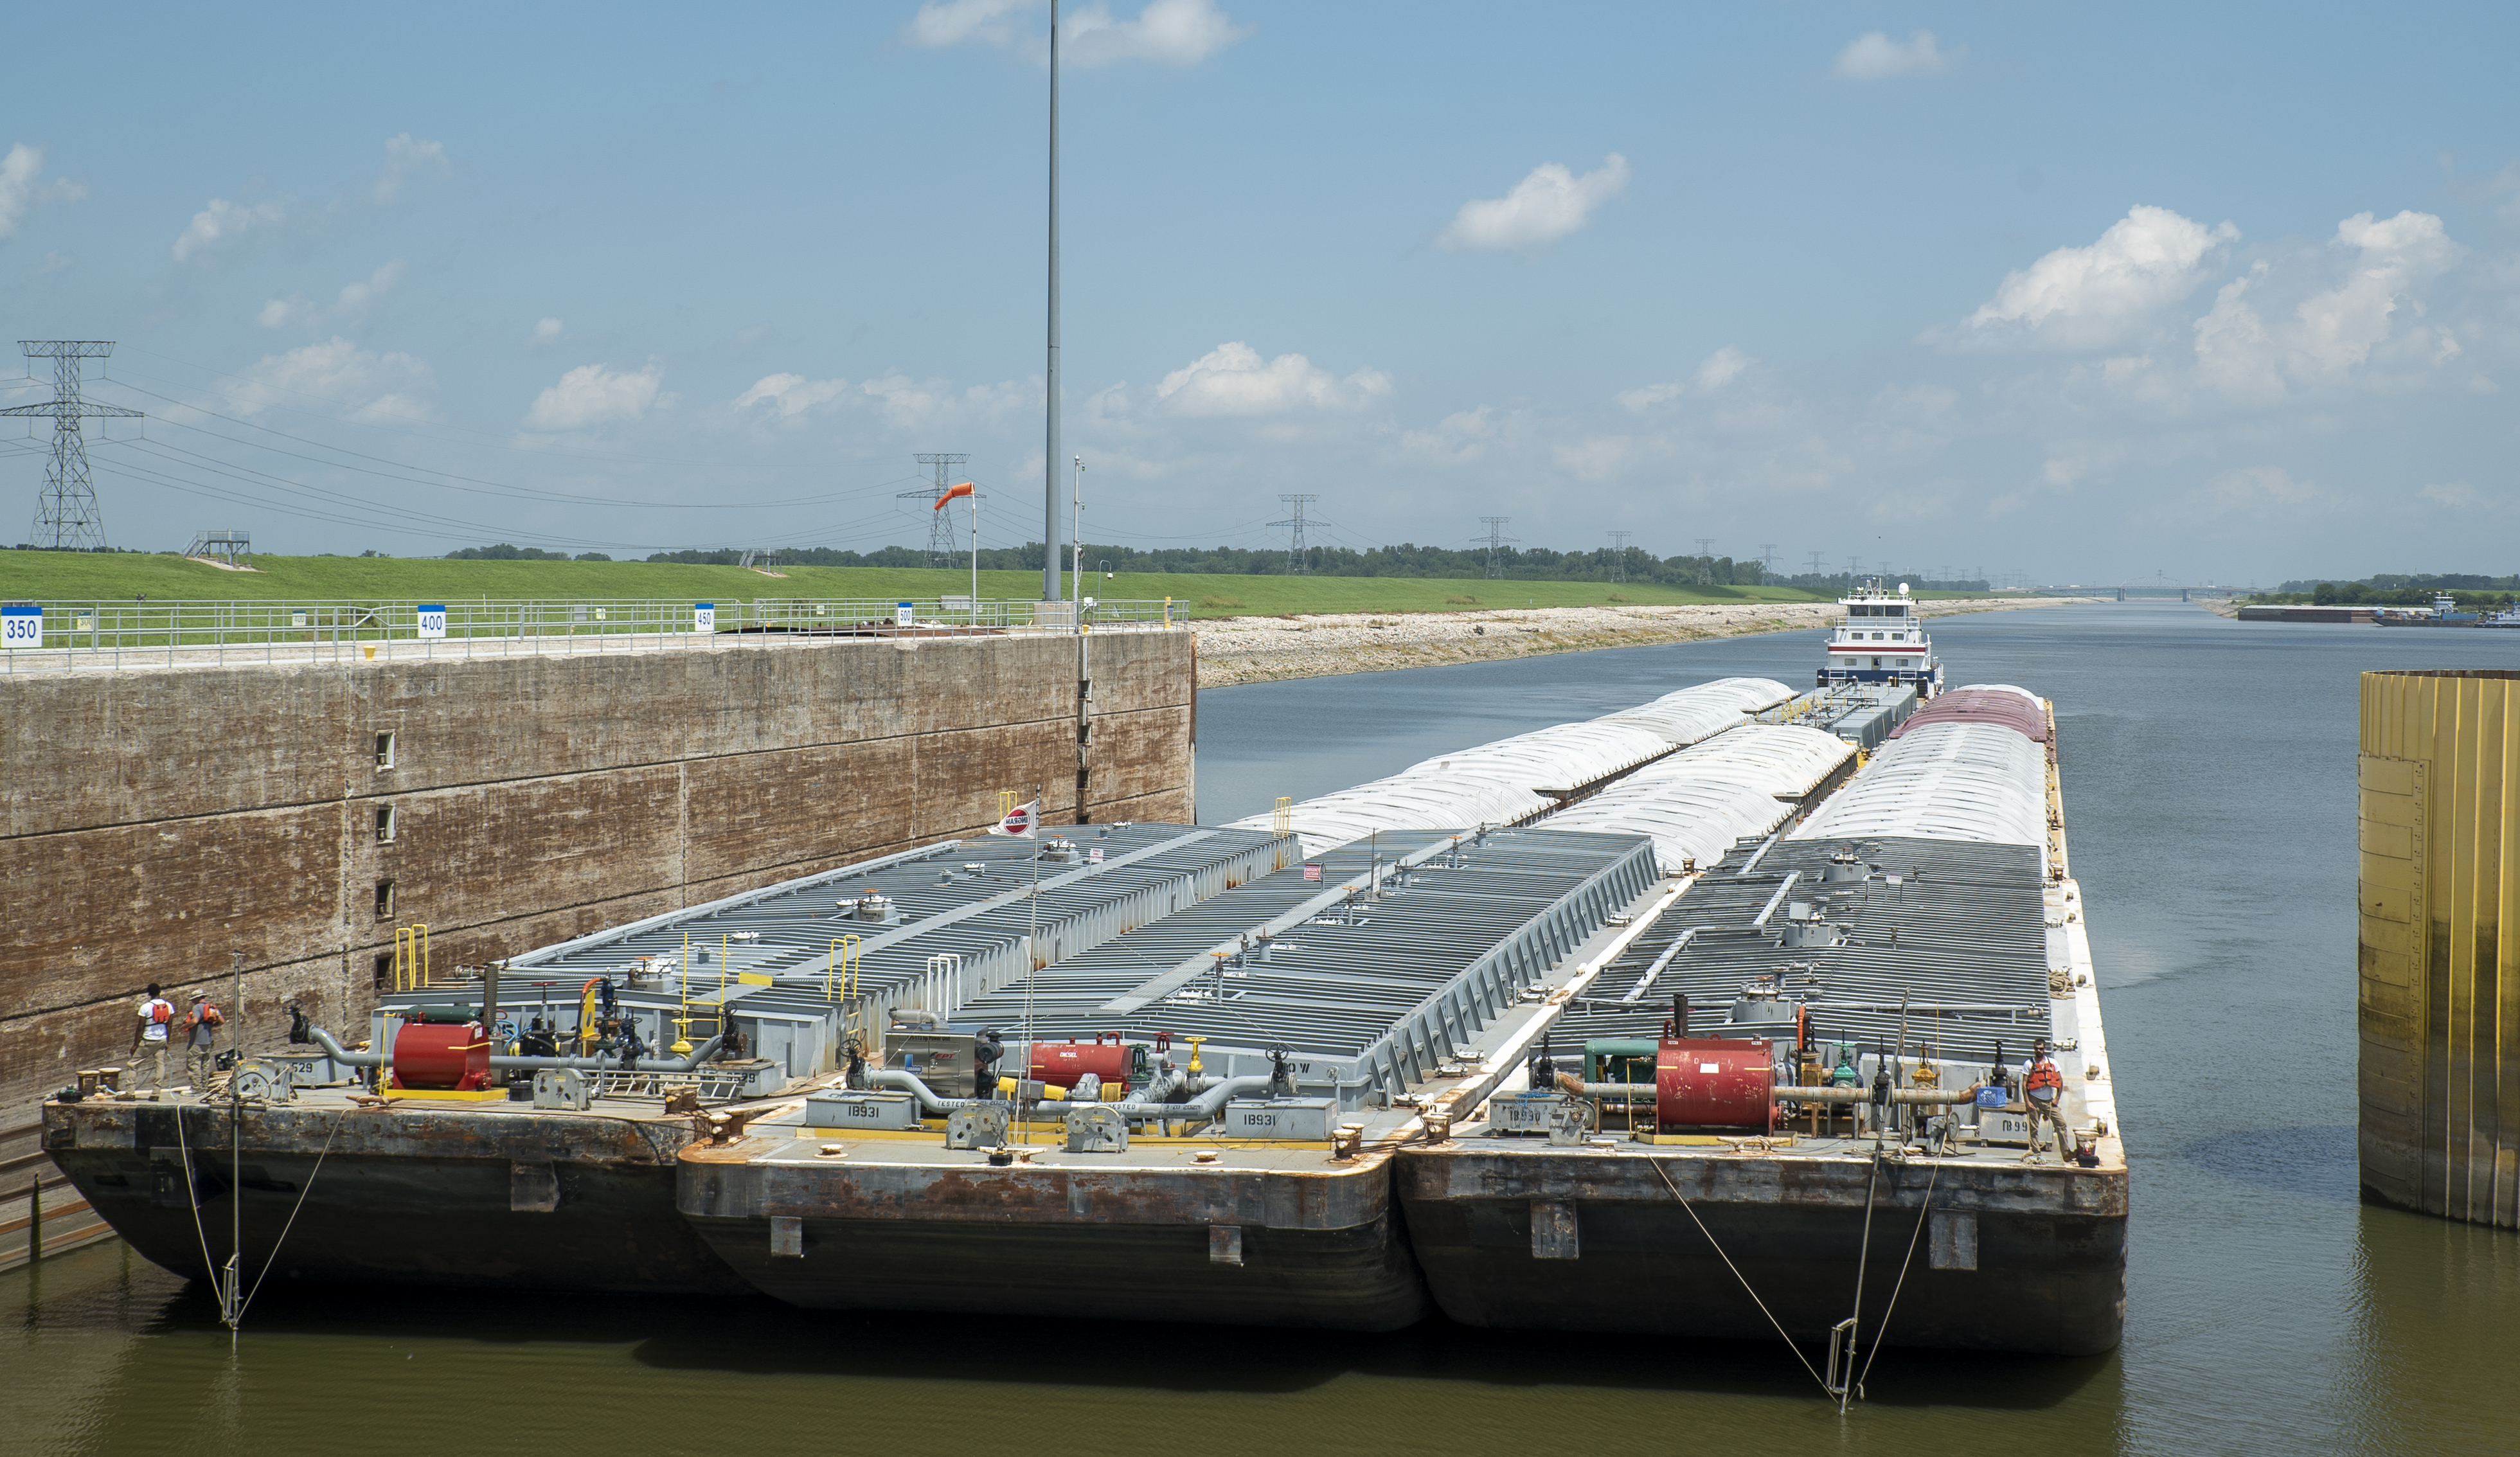 A barge approaches a lock.